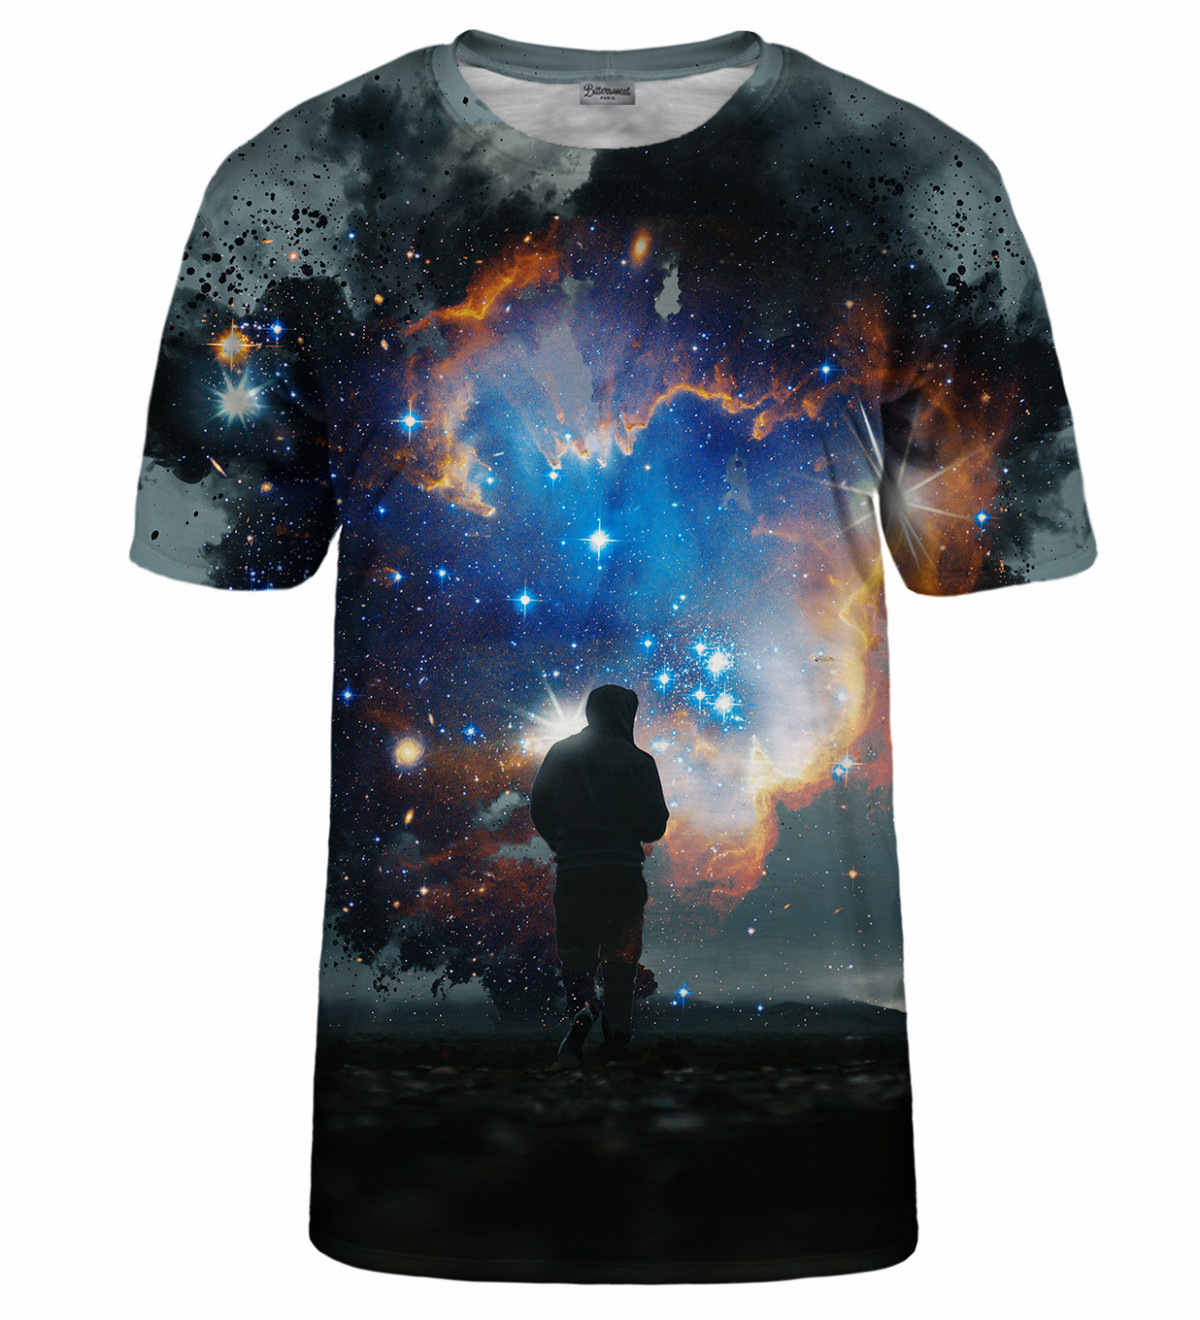 Step into the Galaxy T-Shirt